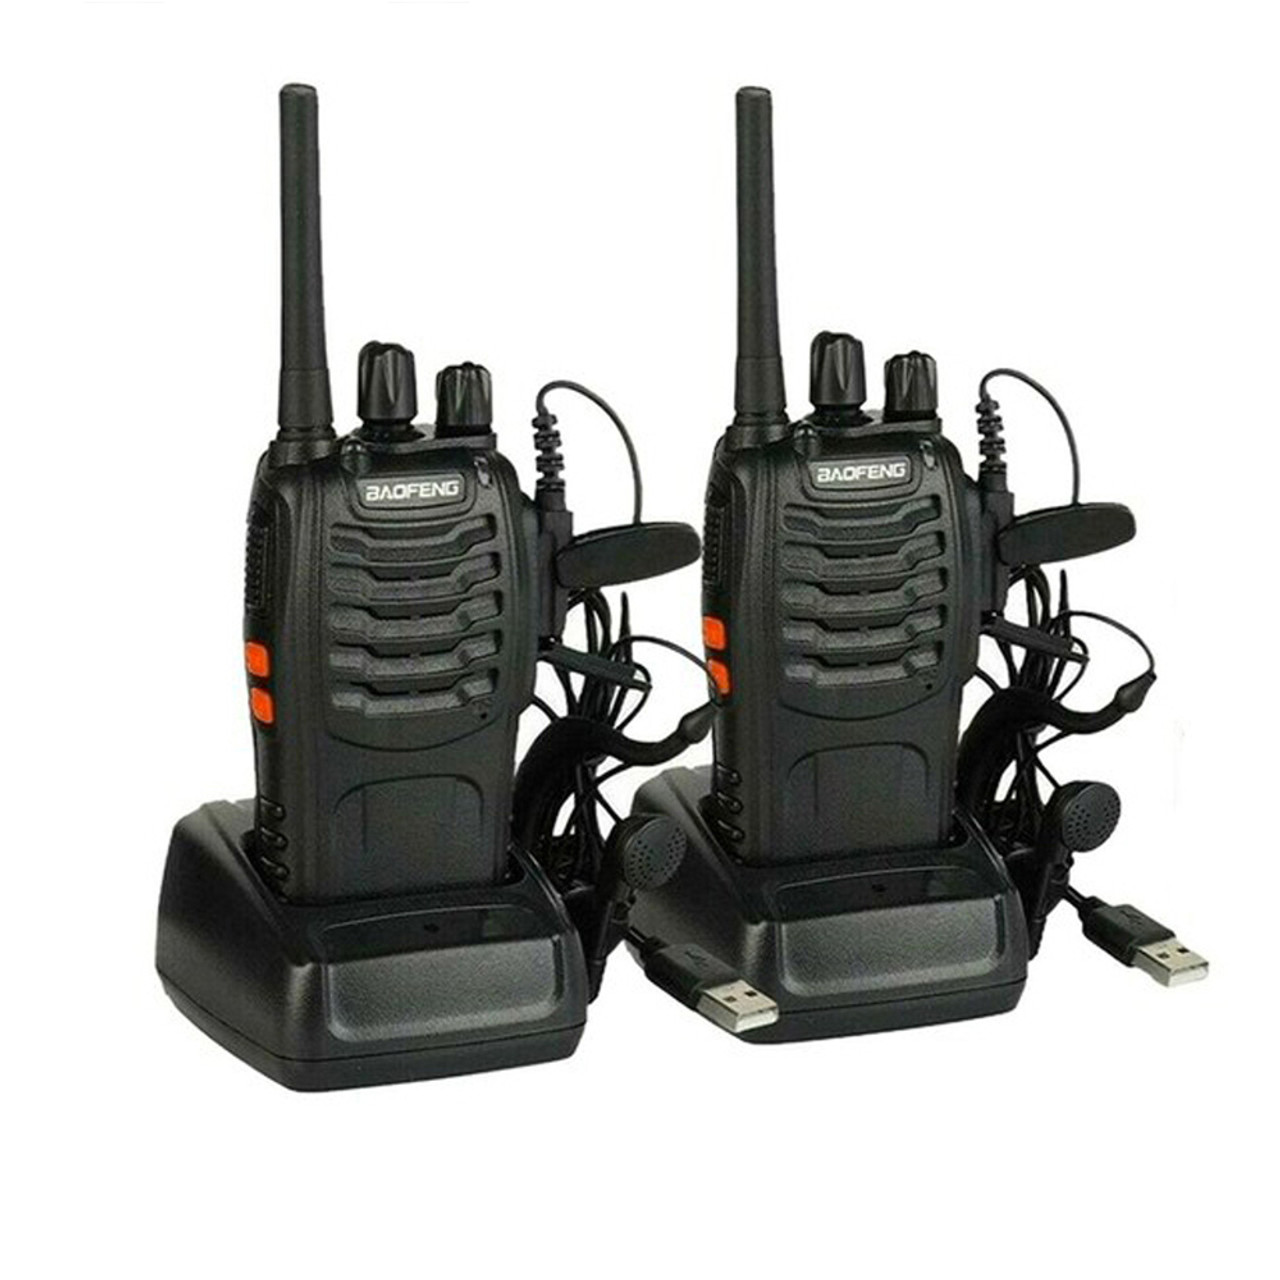 2x BaoFeng BF-888S PMR446 /Baofeng BF-88E PMR Updated Version of 888S Walkie  Talkies Long Range Two Way Radio with Earpieces Baofeng Radio UK